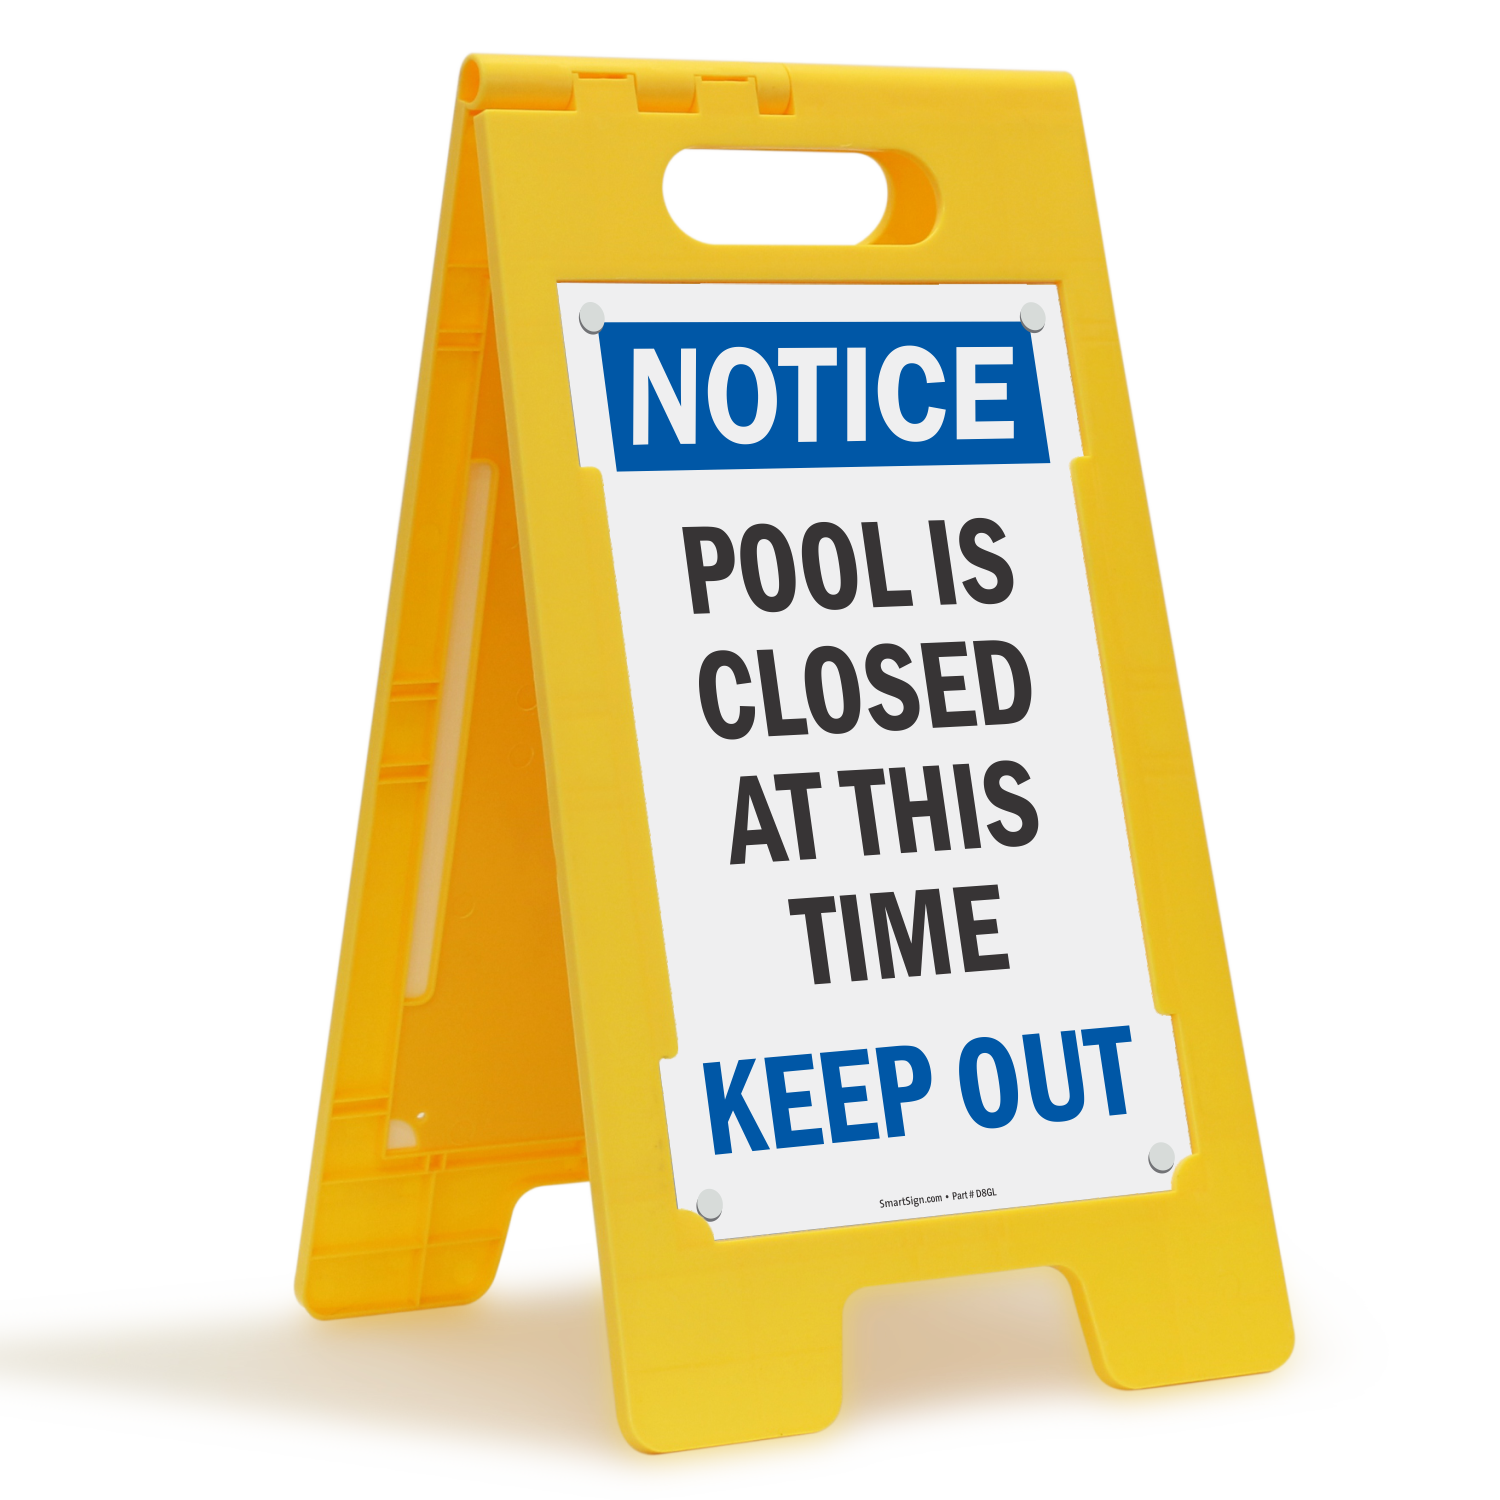 Keep you close. Столб keep out. Quiet please Testing in progress. Pool is closed. Quiet, please! Exams are in progress таблички.